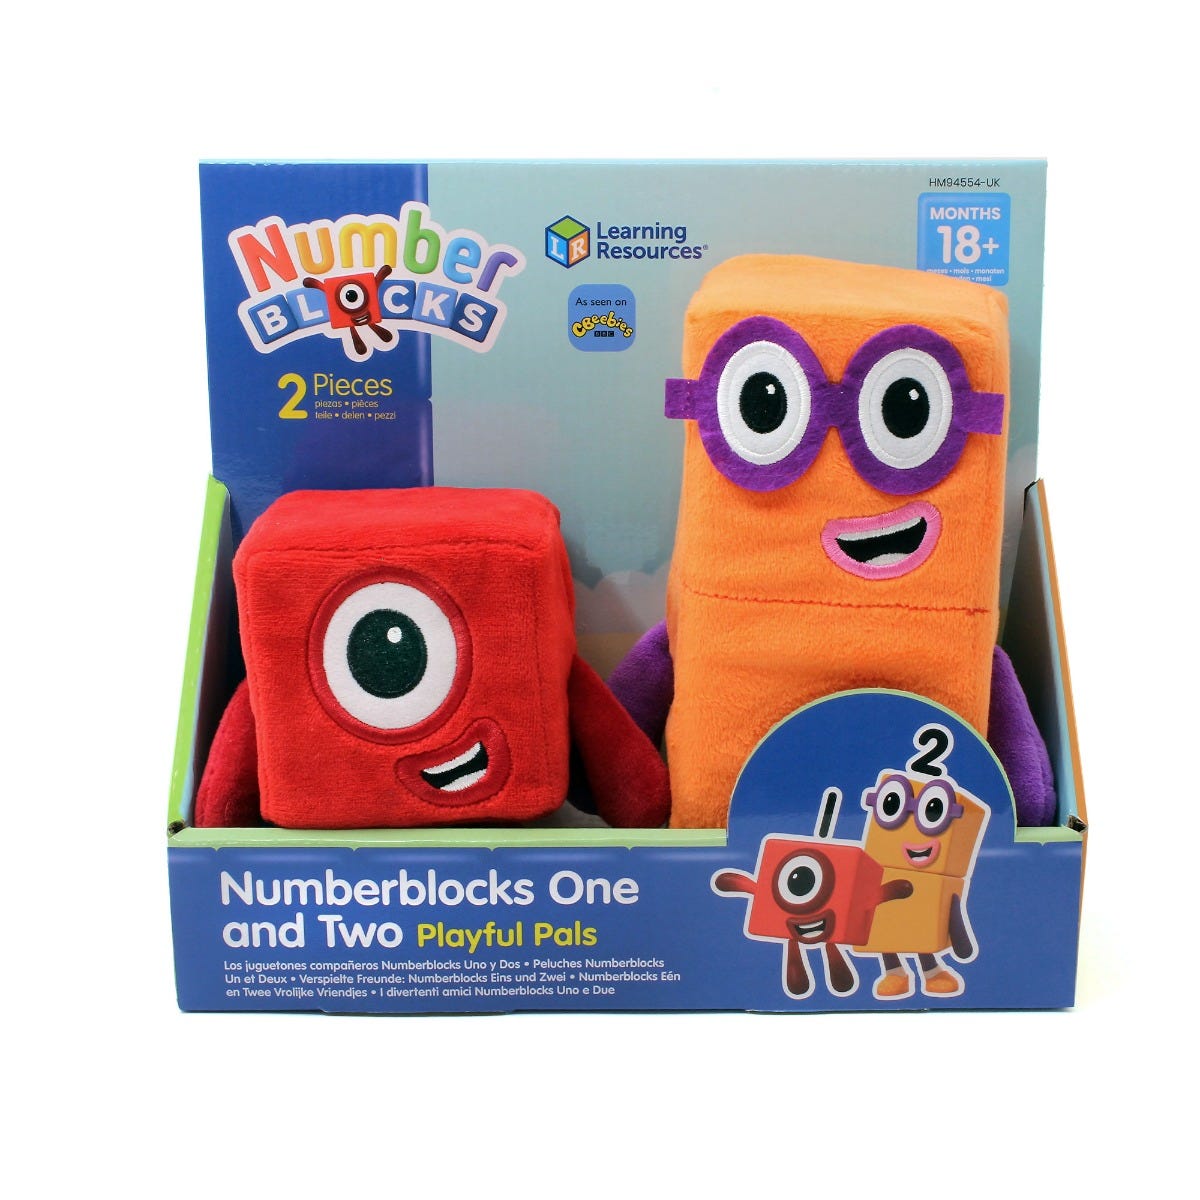 Numberblocks One And Two Playful Pals, Bring the on-screen magic of the Numberblocks to life for young fans of the award-winning CBeebies TV series with the Numberblocks One and Two Playful Pals plush toys. Made from super-soft plush fabric and with embroidered features, they’re ready for cuddles and snuggles. These plush toys are stuffed with high quality foam to keep their shape, with securely attached limbs, and will be fun, cuddly companions for years to come. Spark your child’s imagination with these f